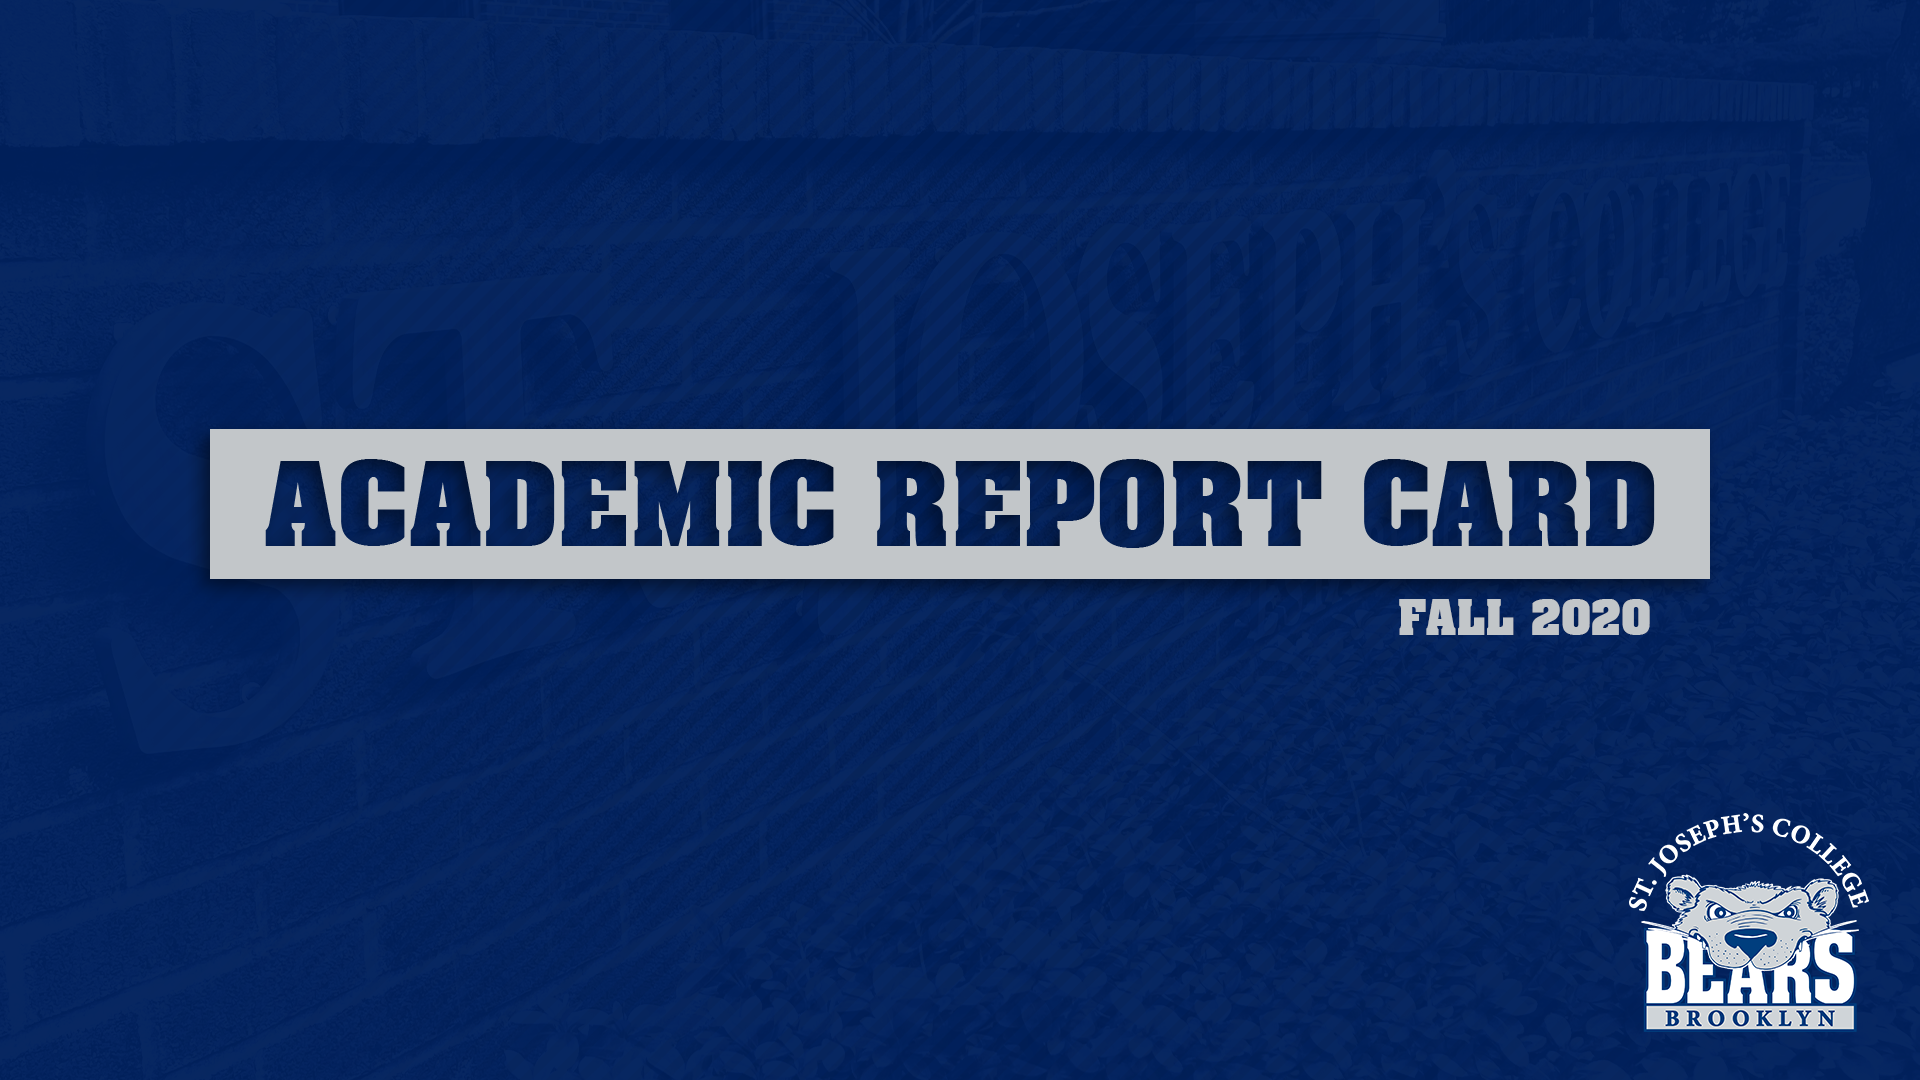 Over Three-Quarters of Bears Student-Athletes Score 3.0 or Better in Strong Academic Fall